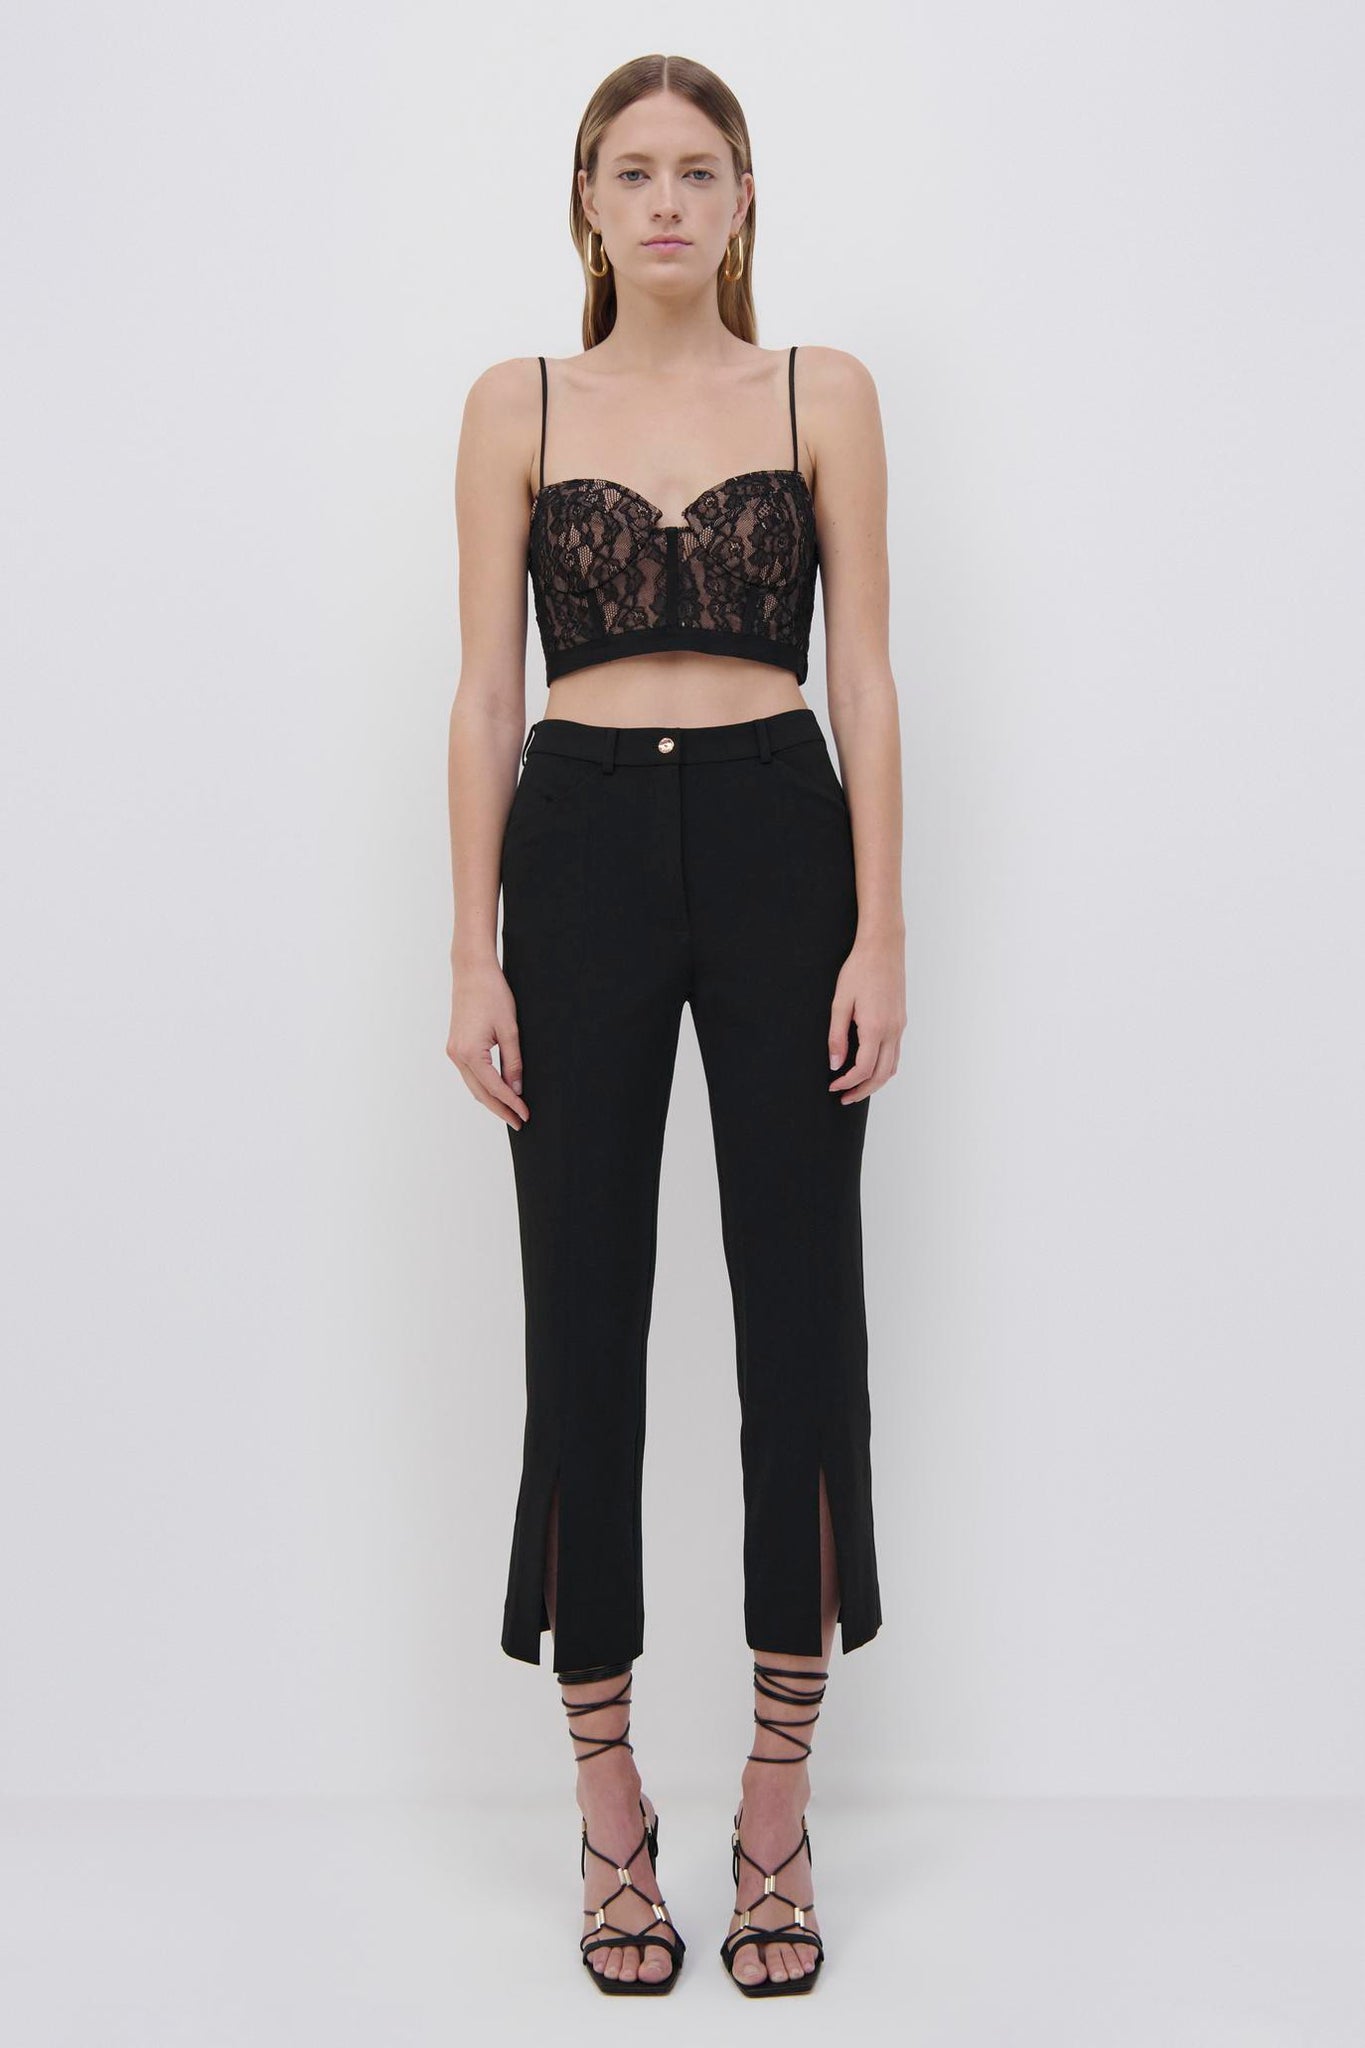 Shirley Delicate Lace Bustier Top - SIMKHAI 